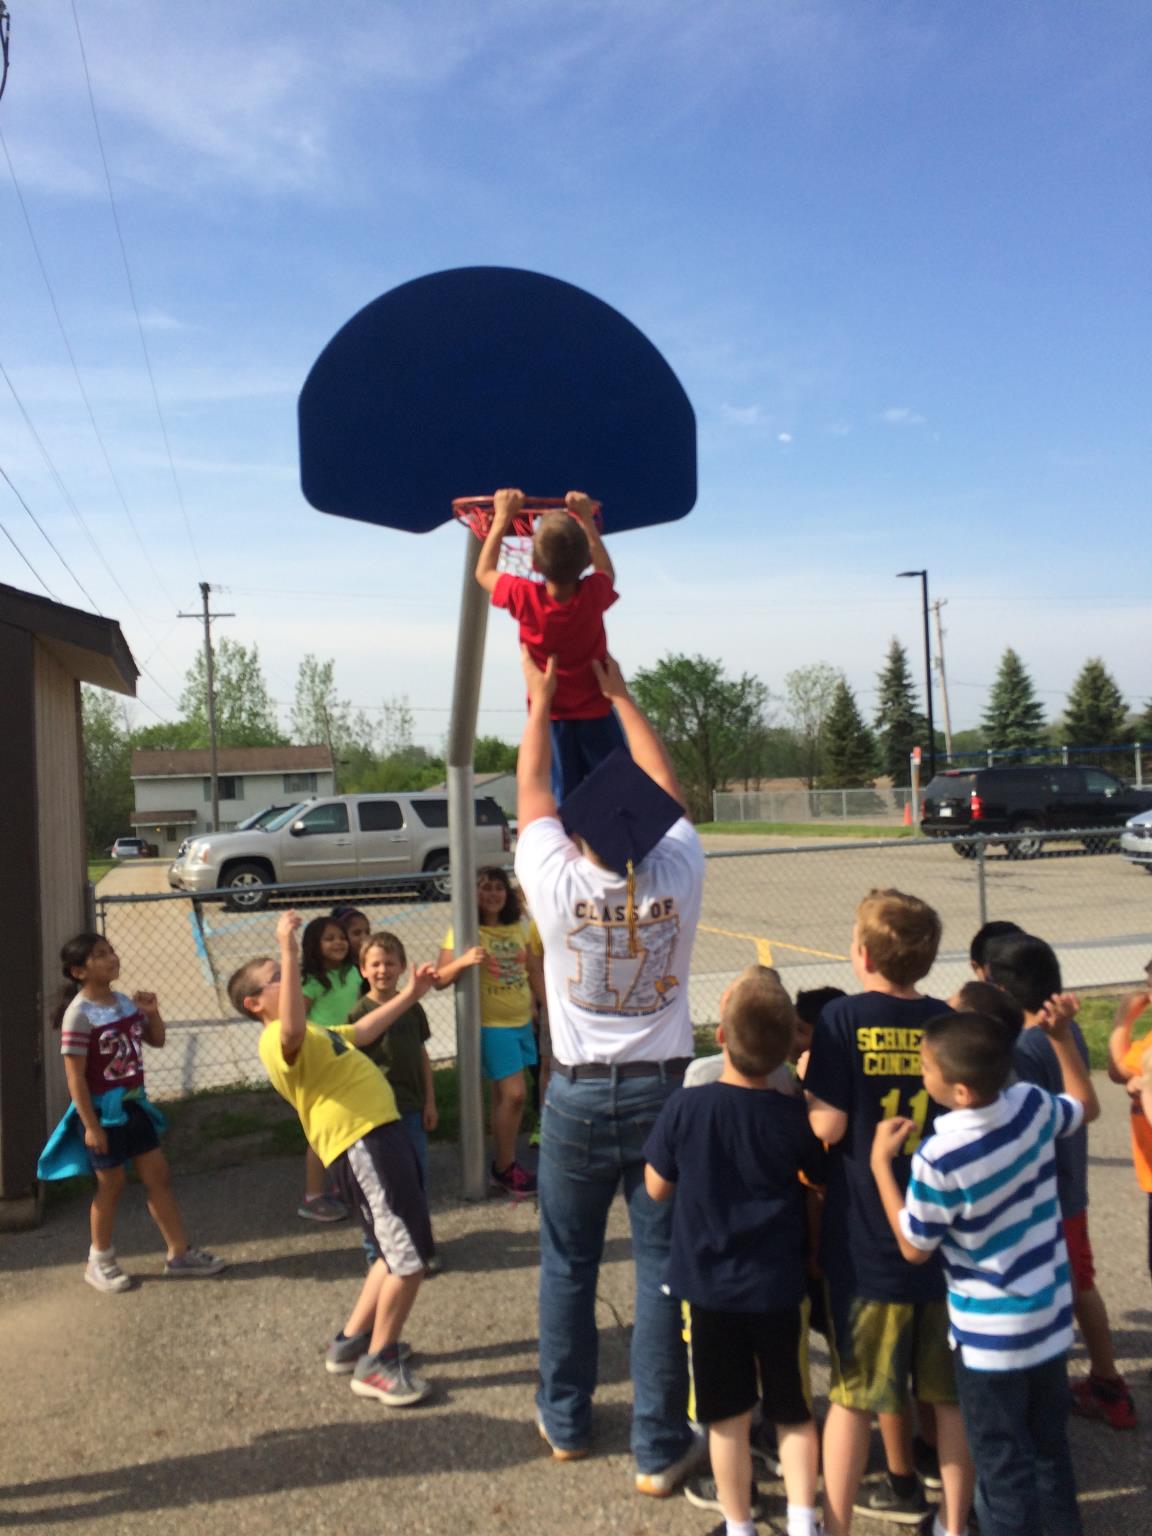 A member of the Class fo 2017 hoists up a Pewamo Elementary School student to dunk a basket ball on the playground during their visit on their last day before becoming PW graduates.